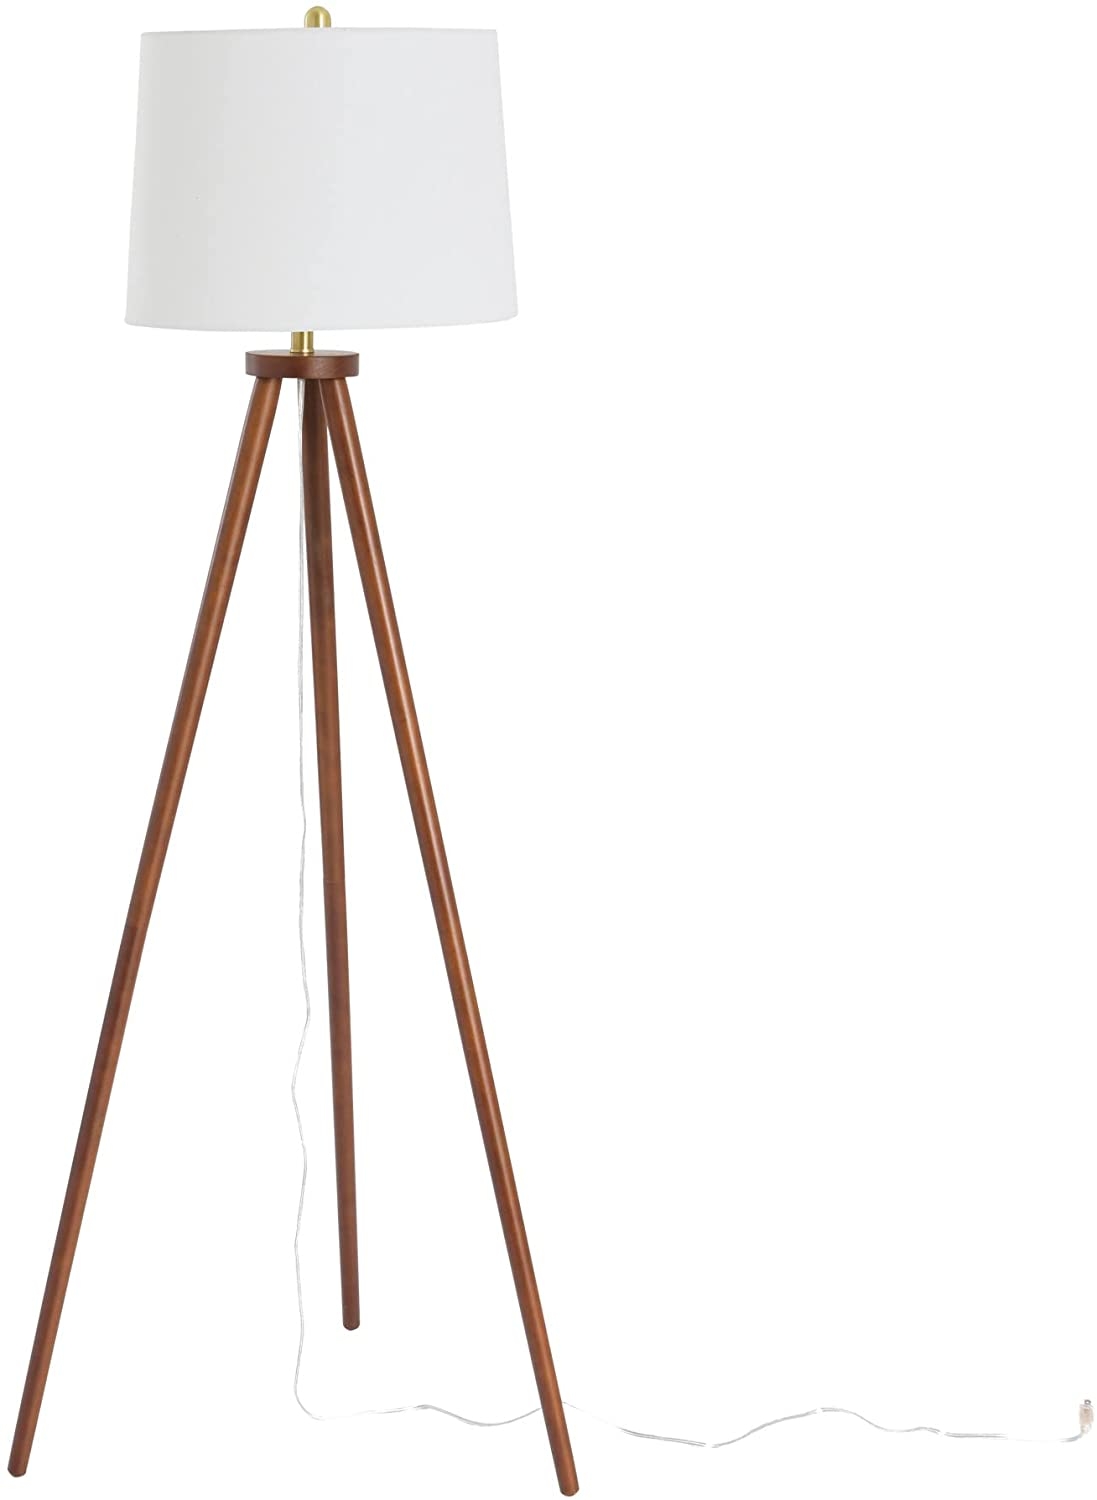 A-Frame Tripod Rubber Wood Floor Lamp with Cream Linen Shade, Espresso - Image 4